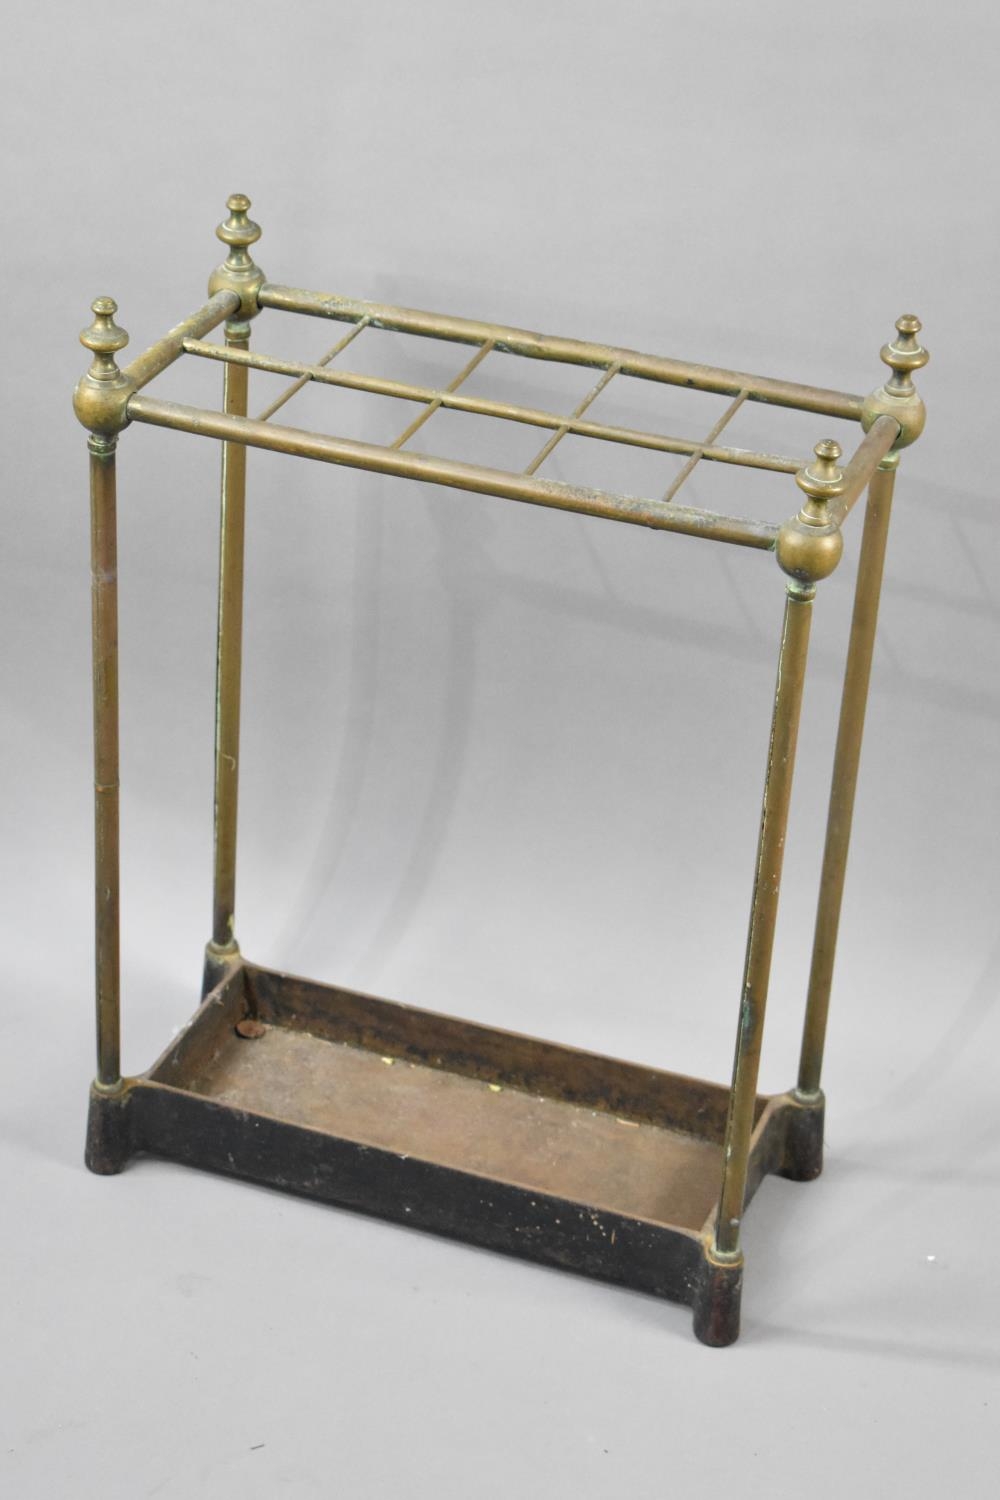 A Late 19th/Early 20th Century Brass Framed Ten Section Stick Stand with Vase Finials on Cast - Image 2 of 2